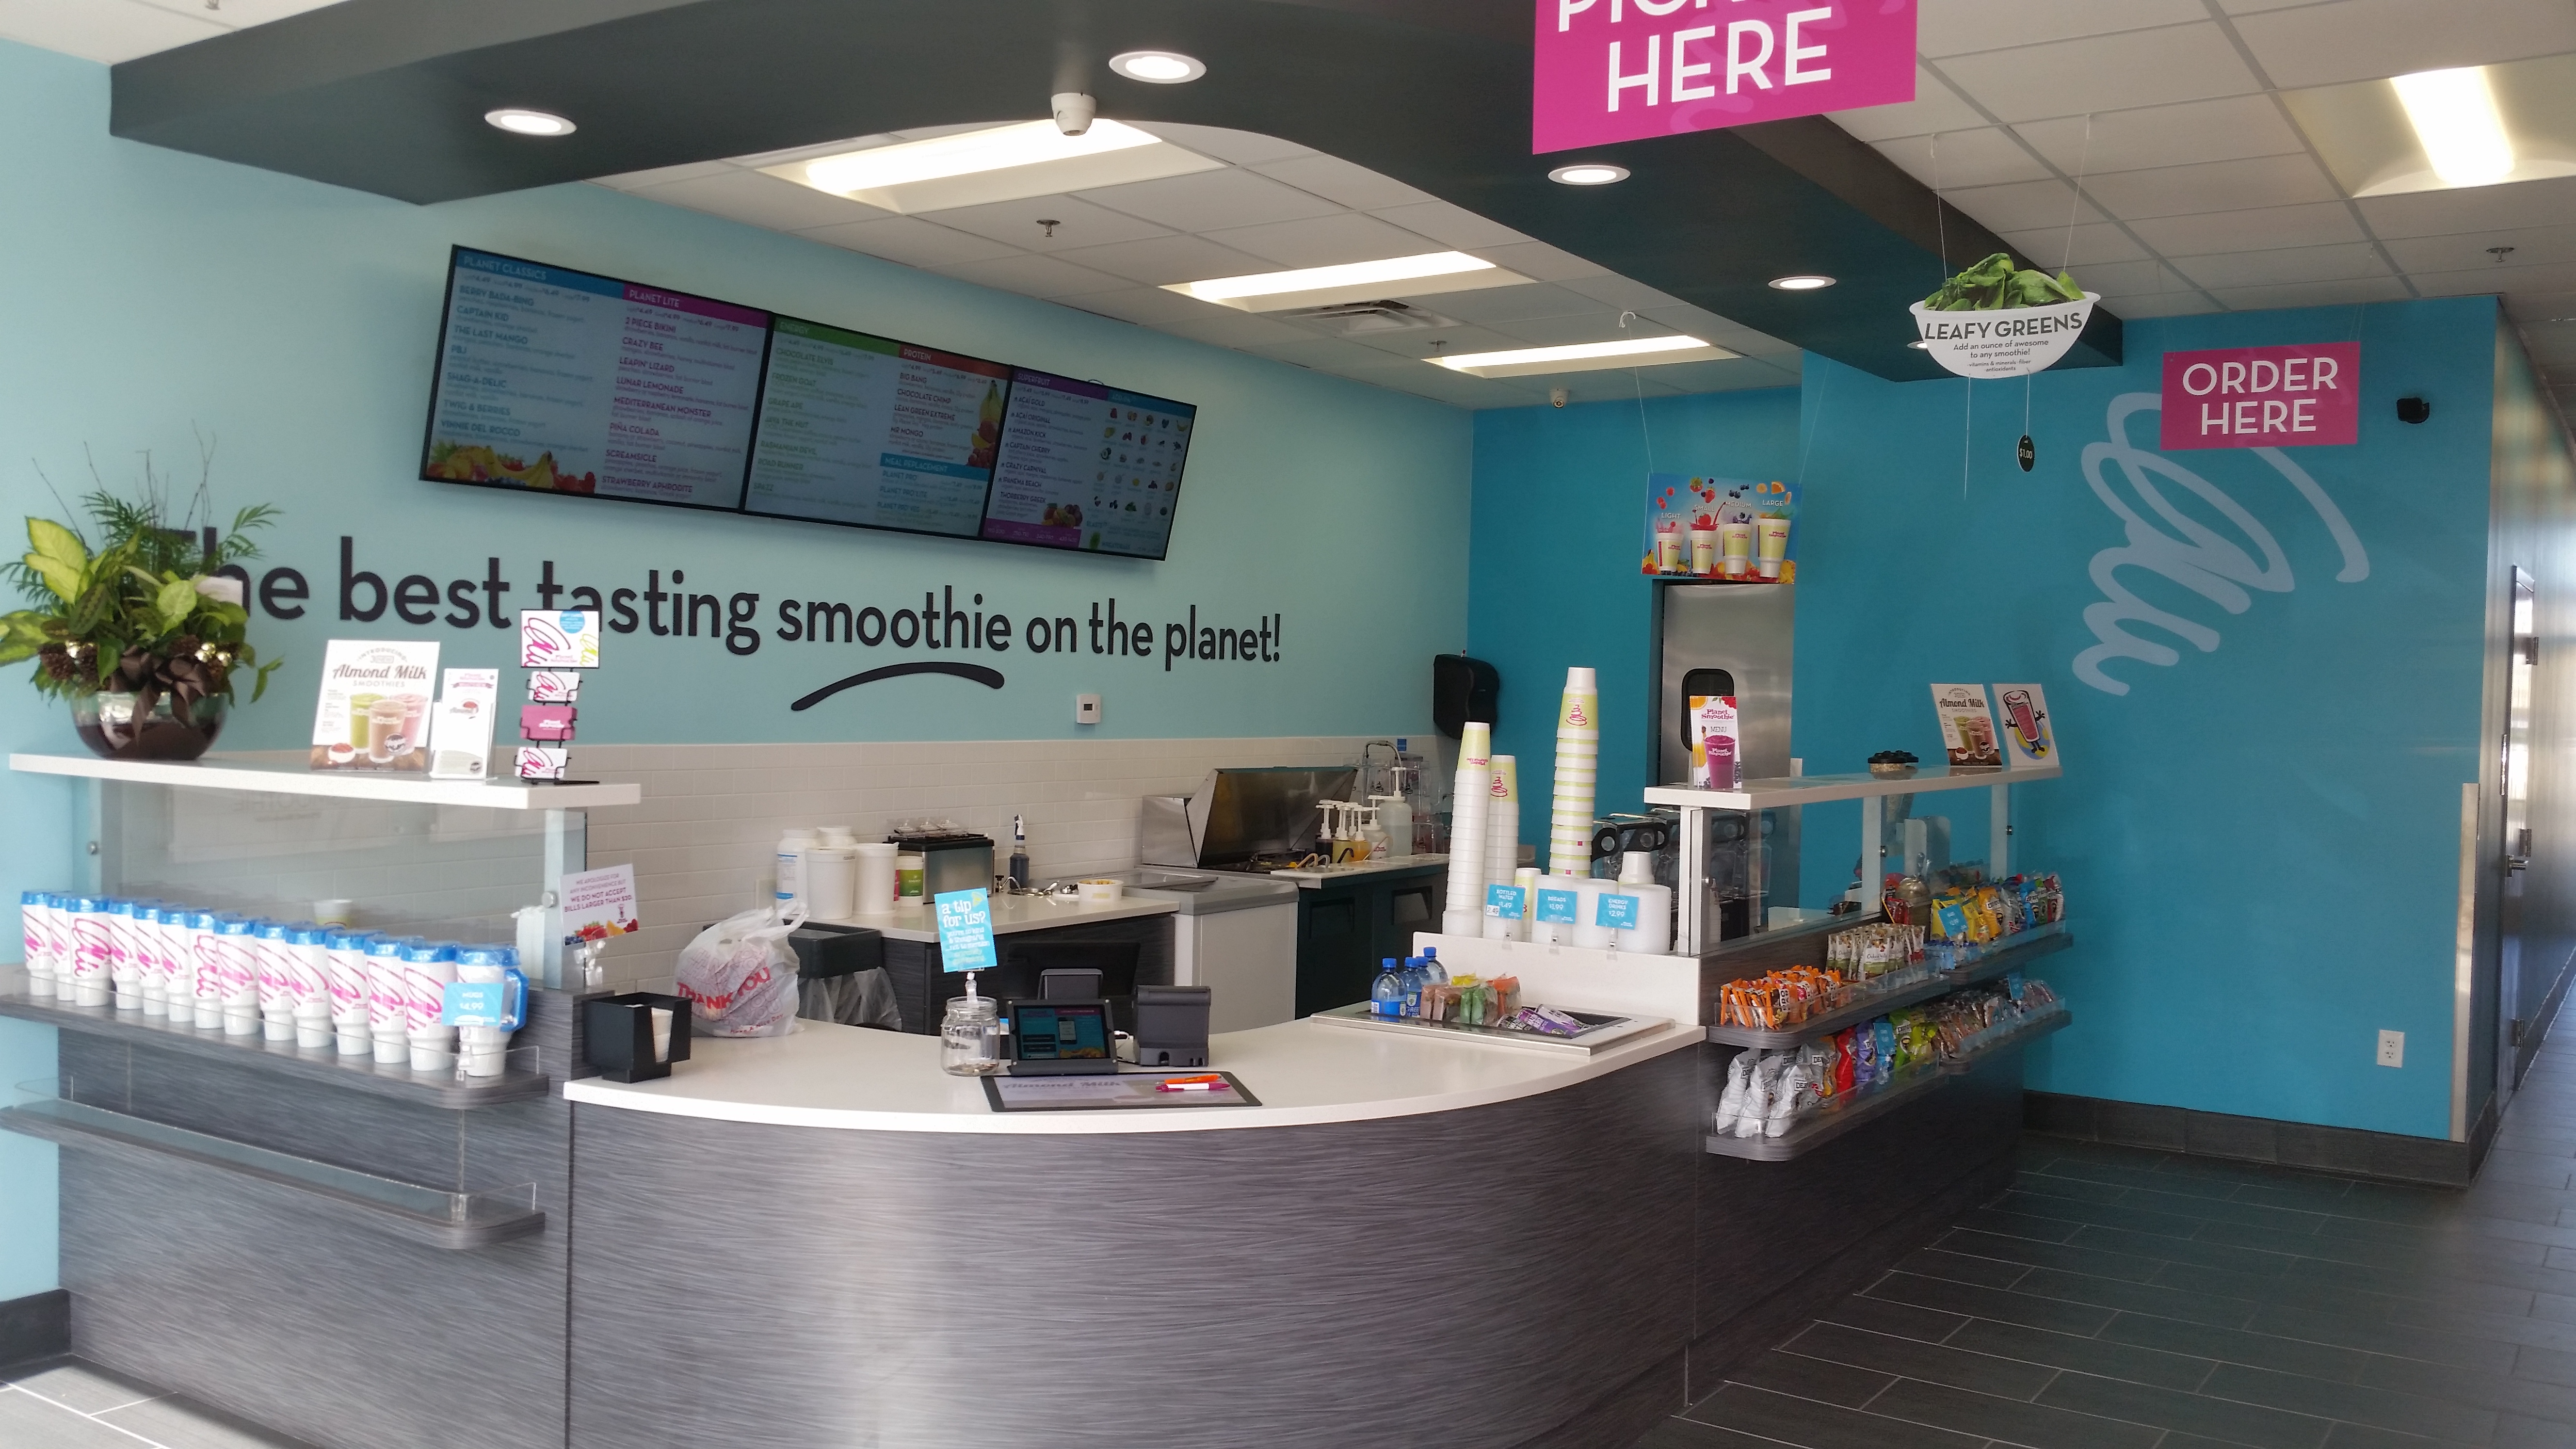 The bright blue interior of a planet smoothie with chrome counters and pink signs / on-trend